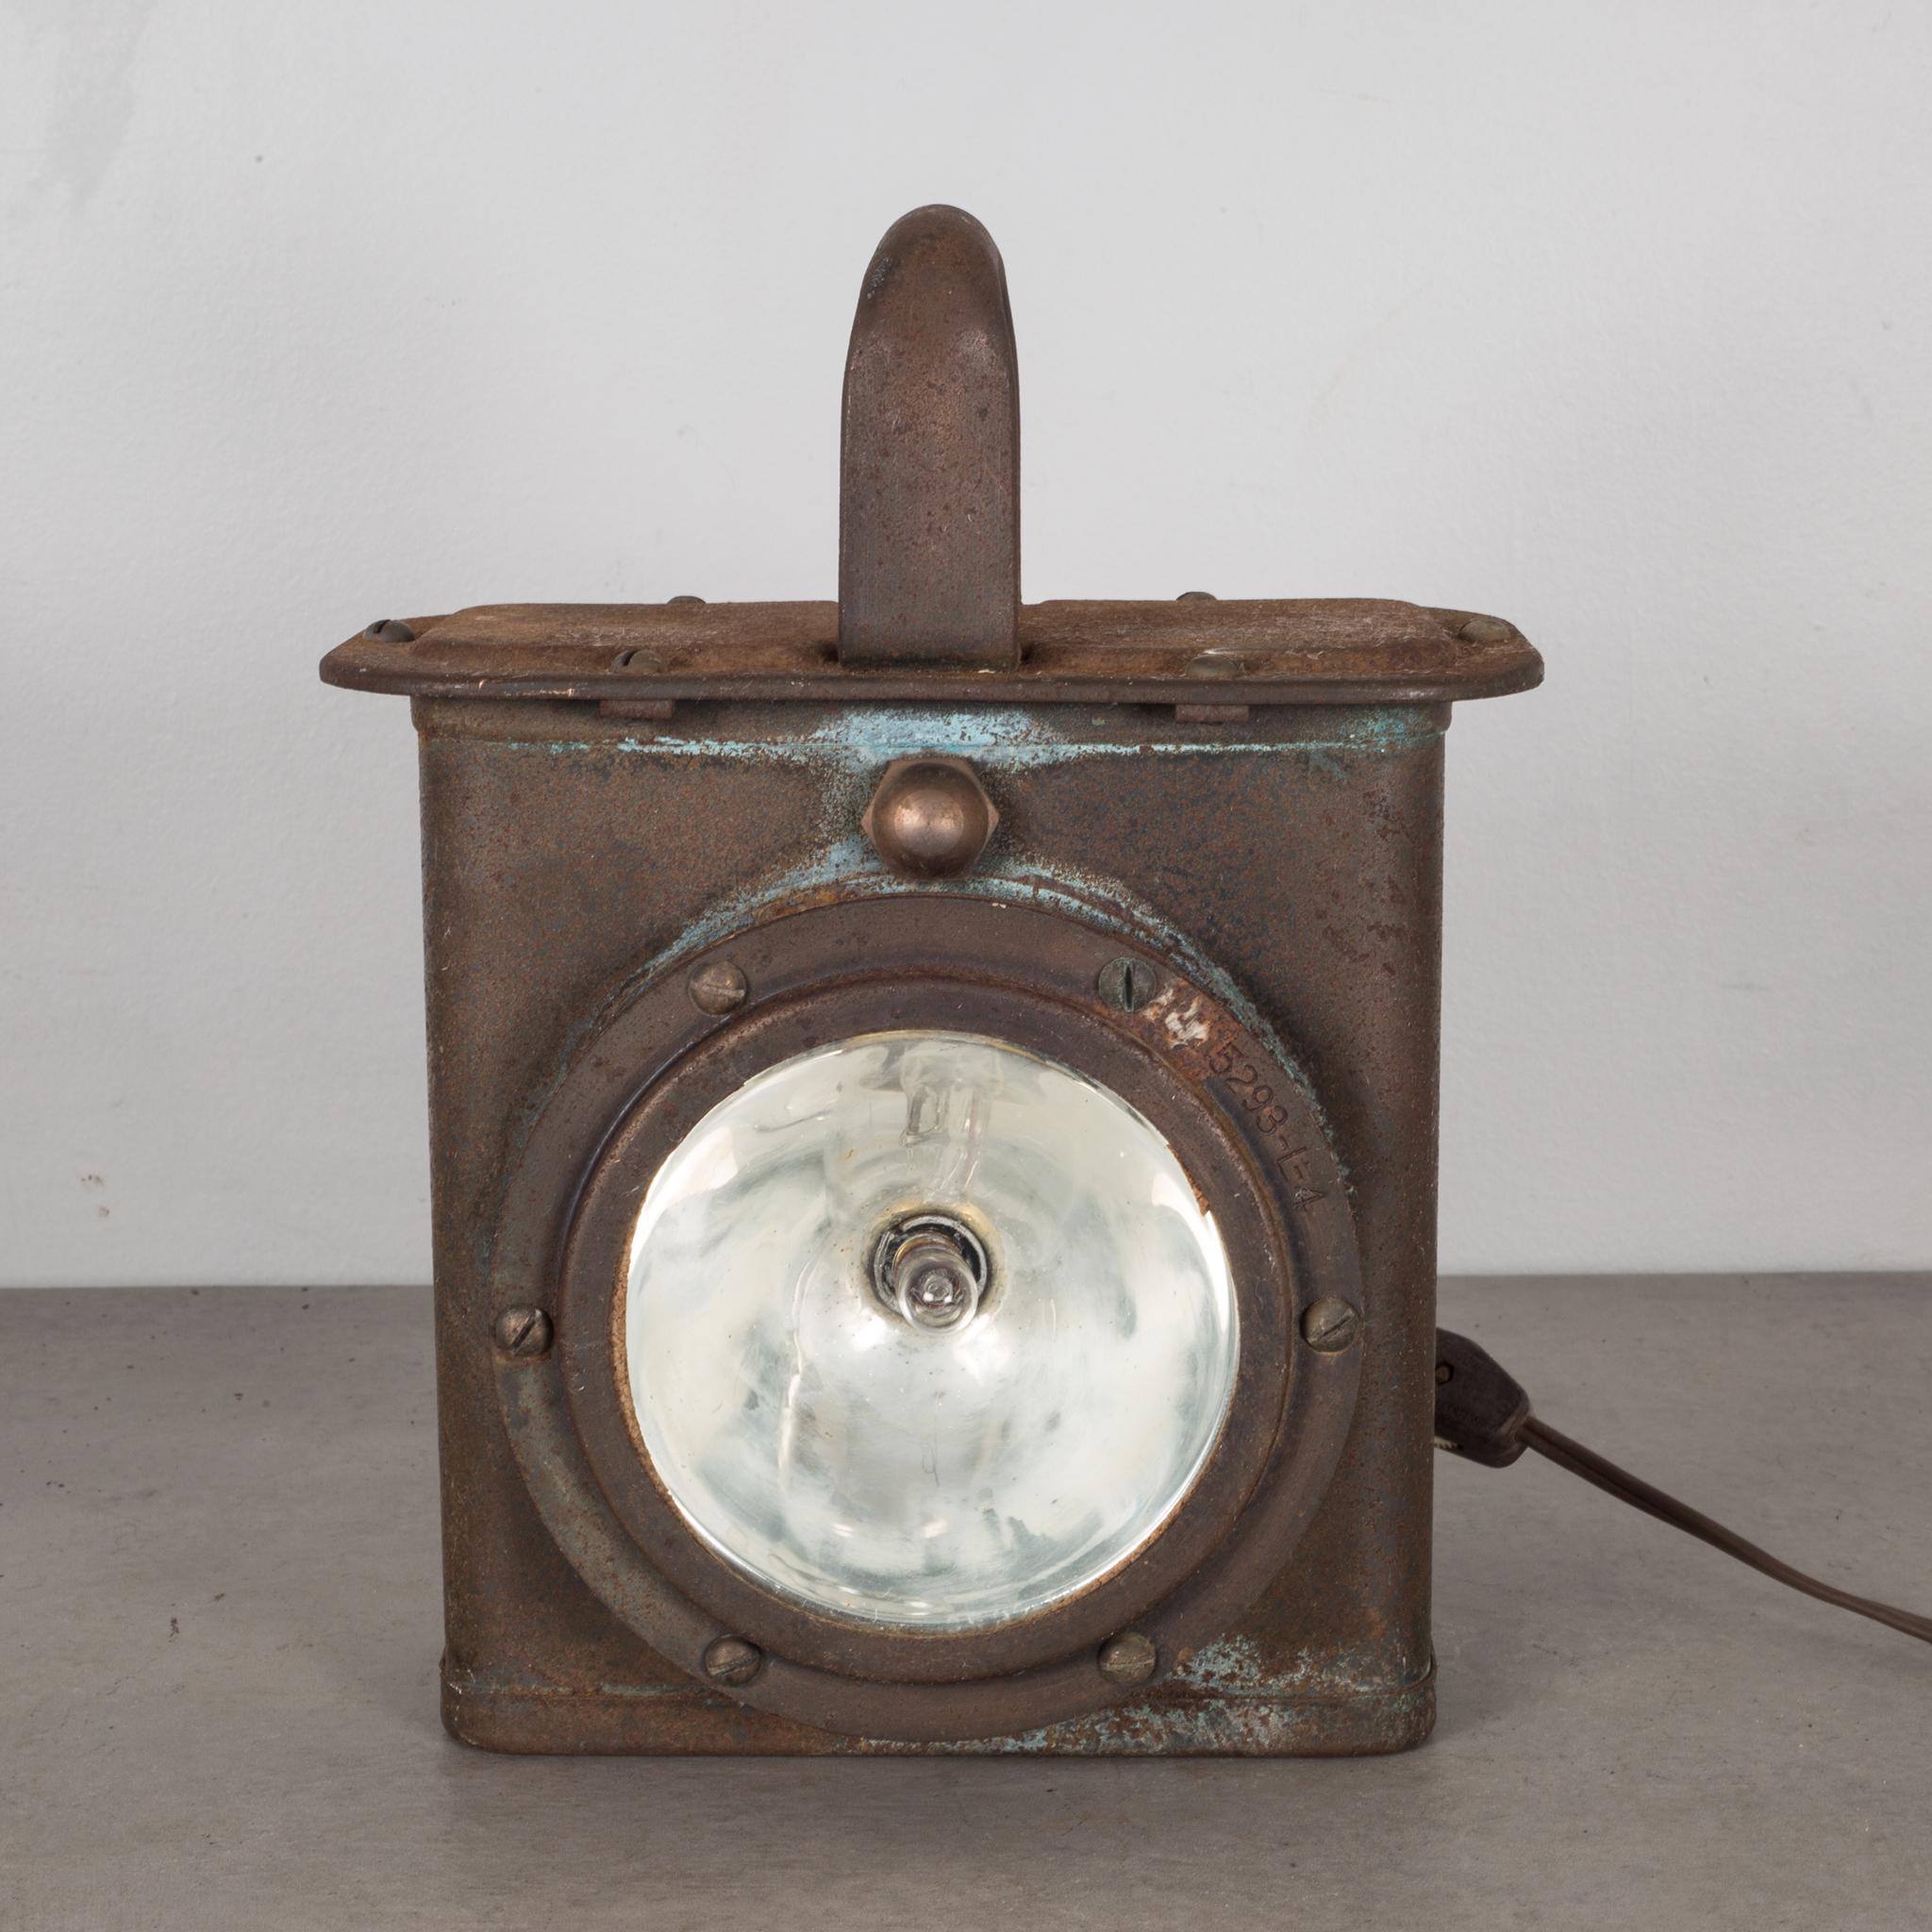 About

This is an original U.S. Navy ship lantern light. The light has a switch on the back on the cord. The light is in good working order and the wiring is good. This piece has retained its original finish and has some minor blemishes. There are